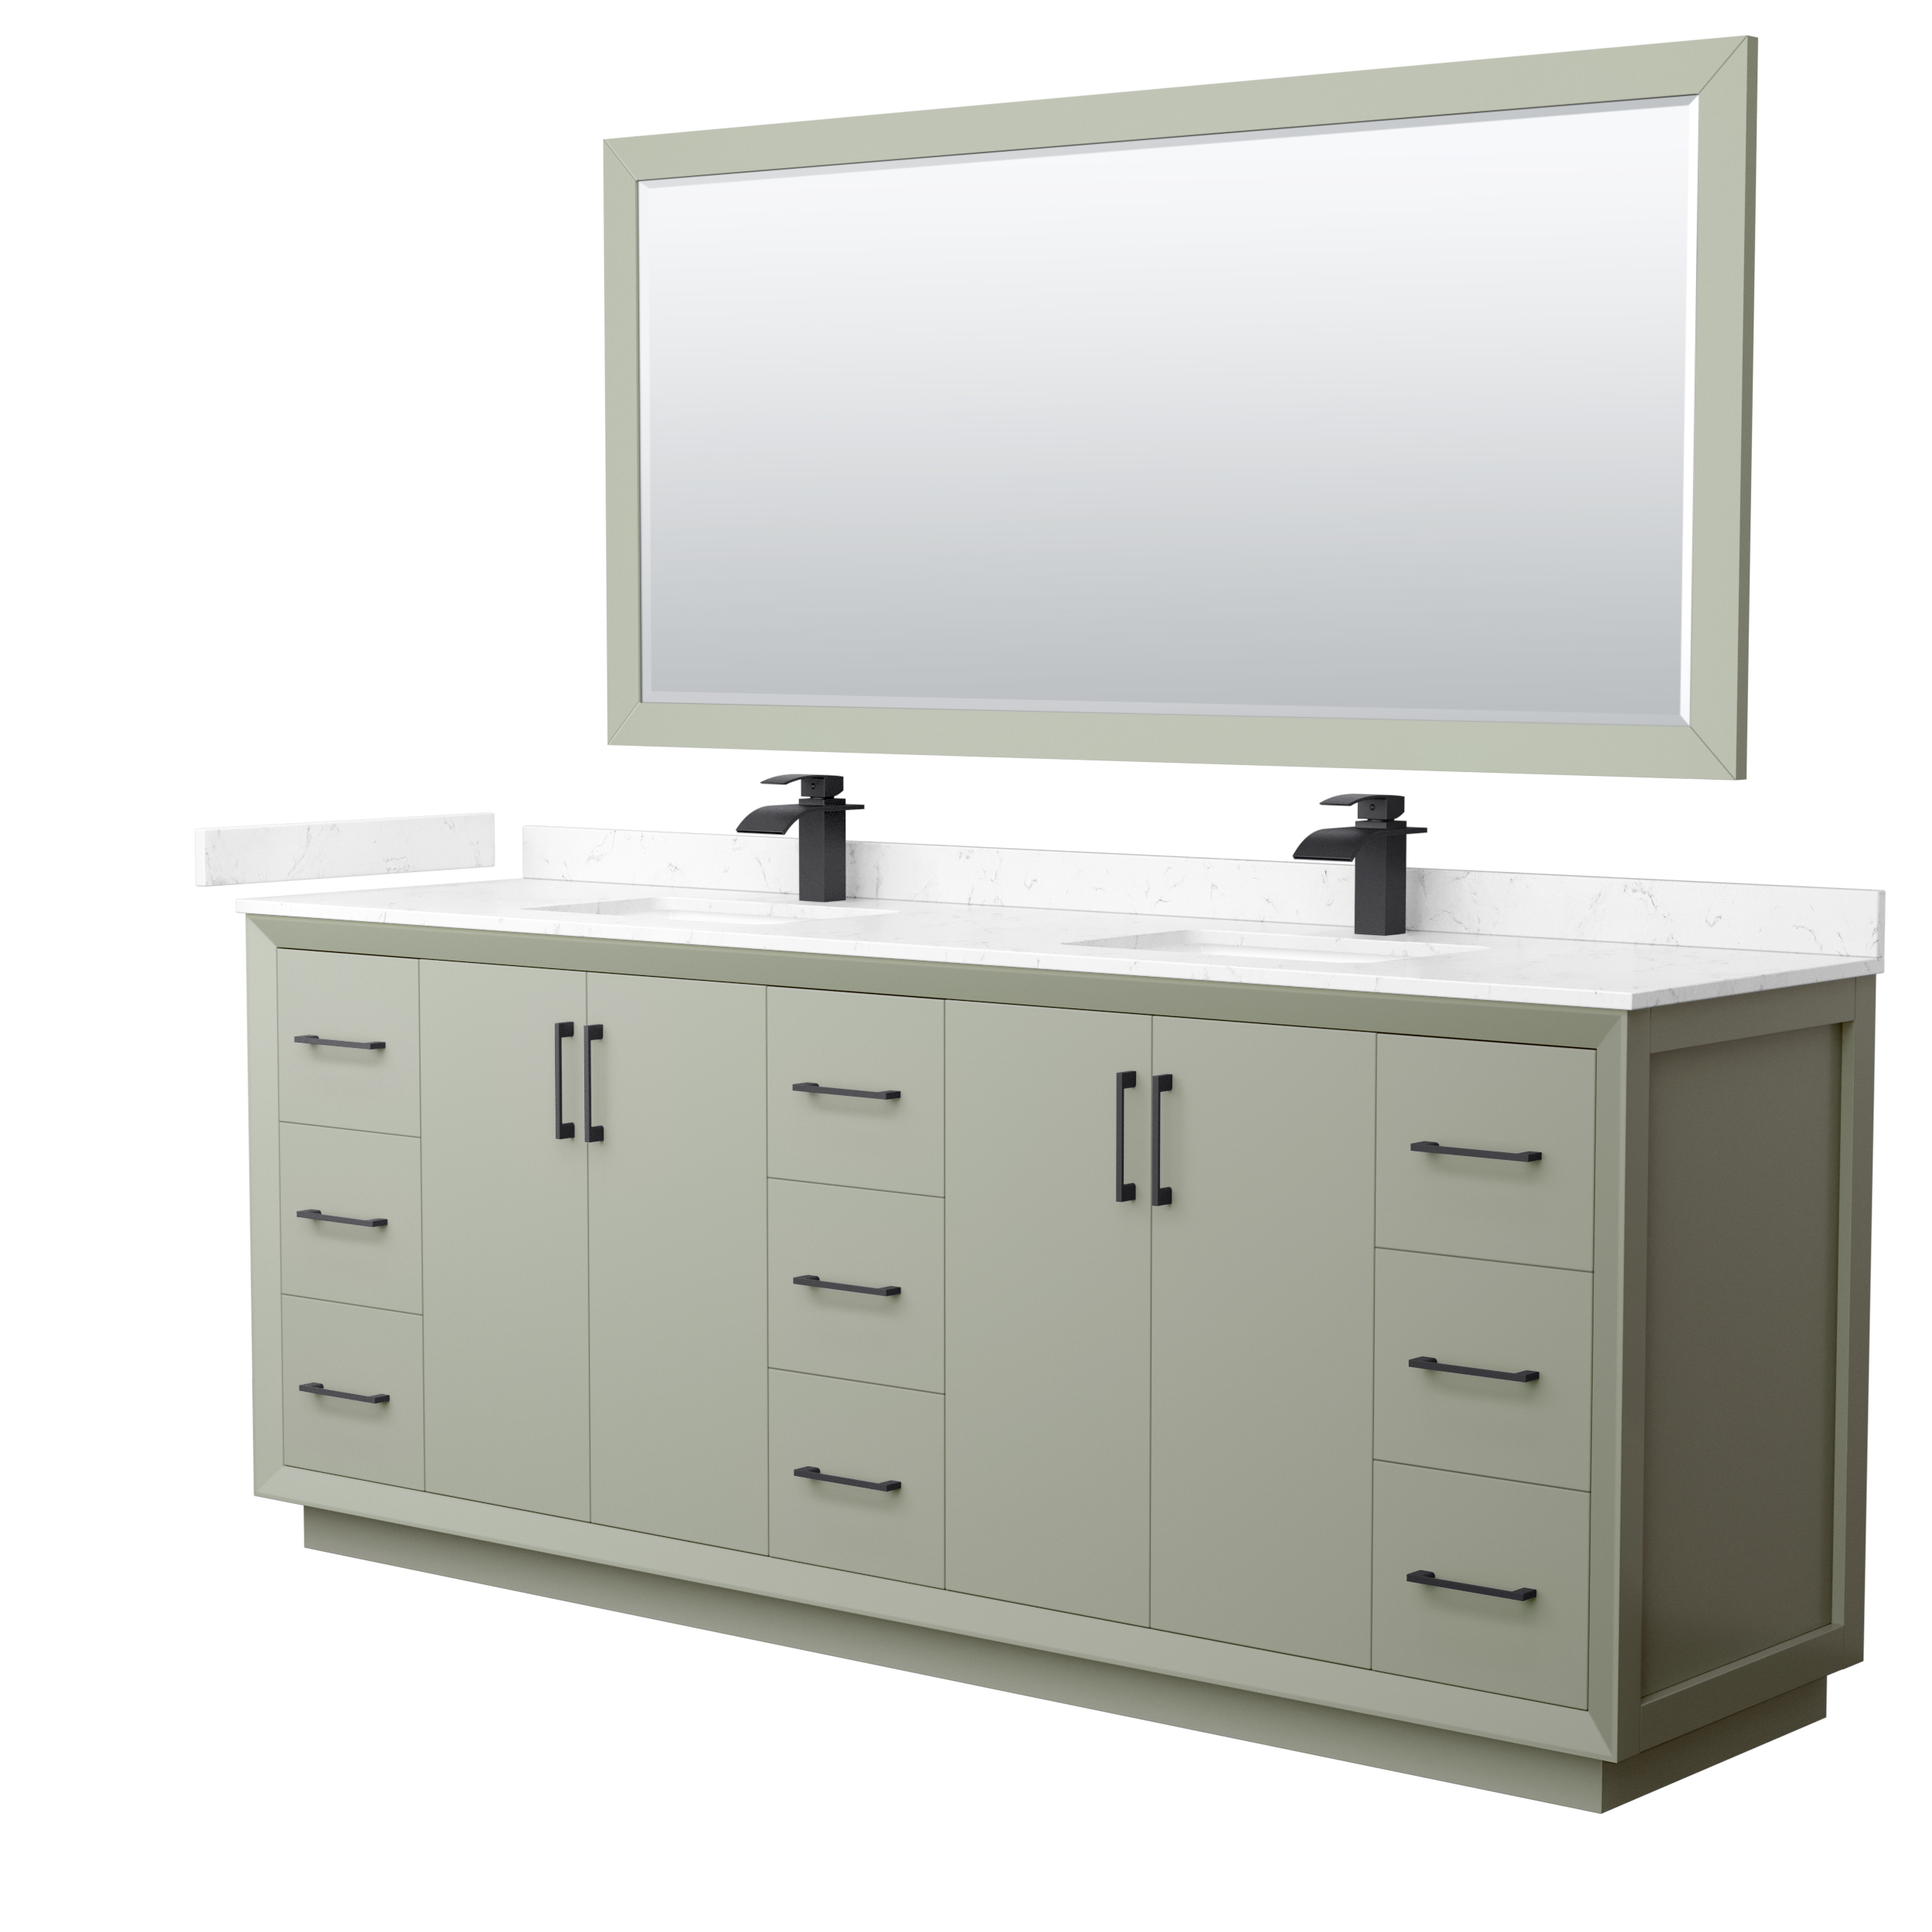 84" Transitional Double Vanity Base in Light Green, 3 Top Option, with 3 Hardware Options and Mirror Option